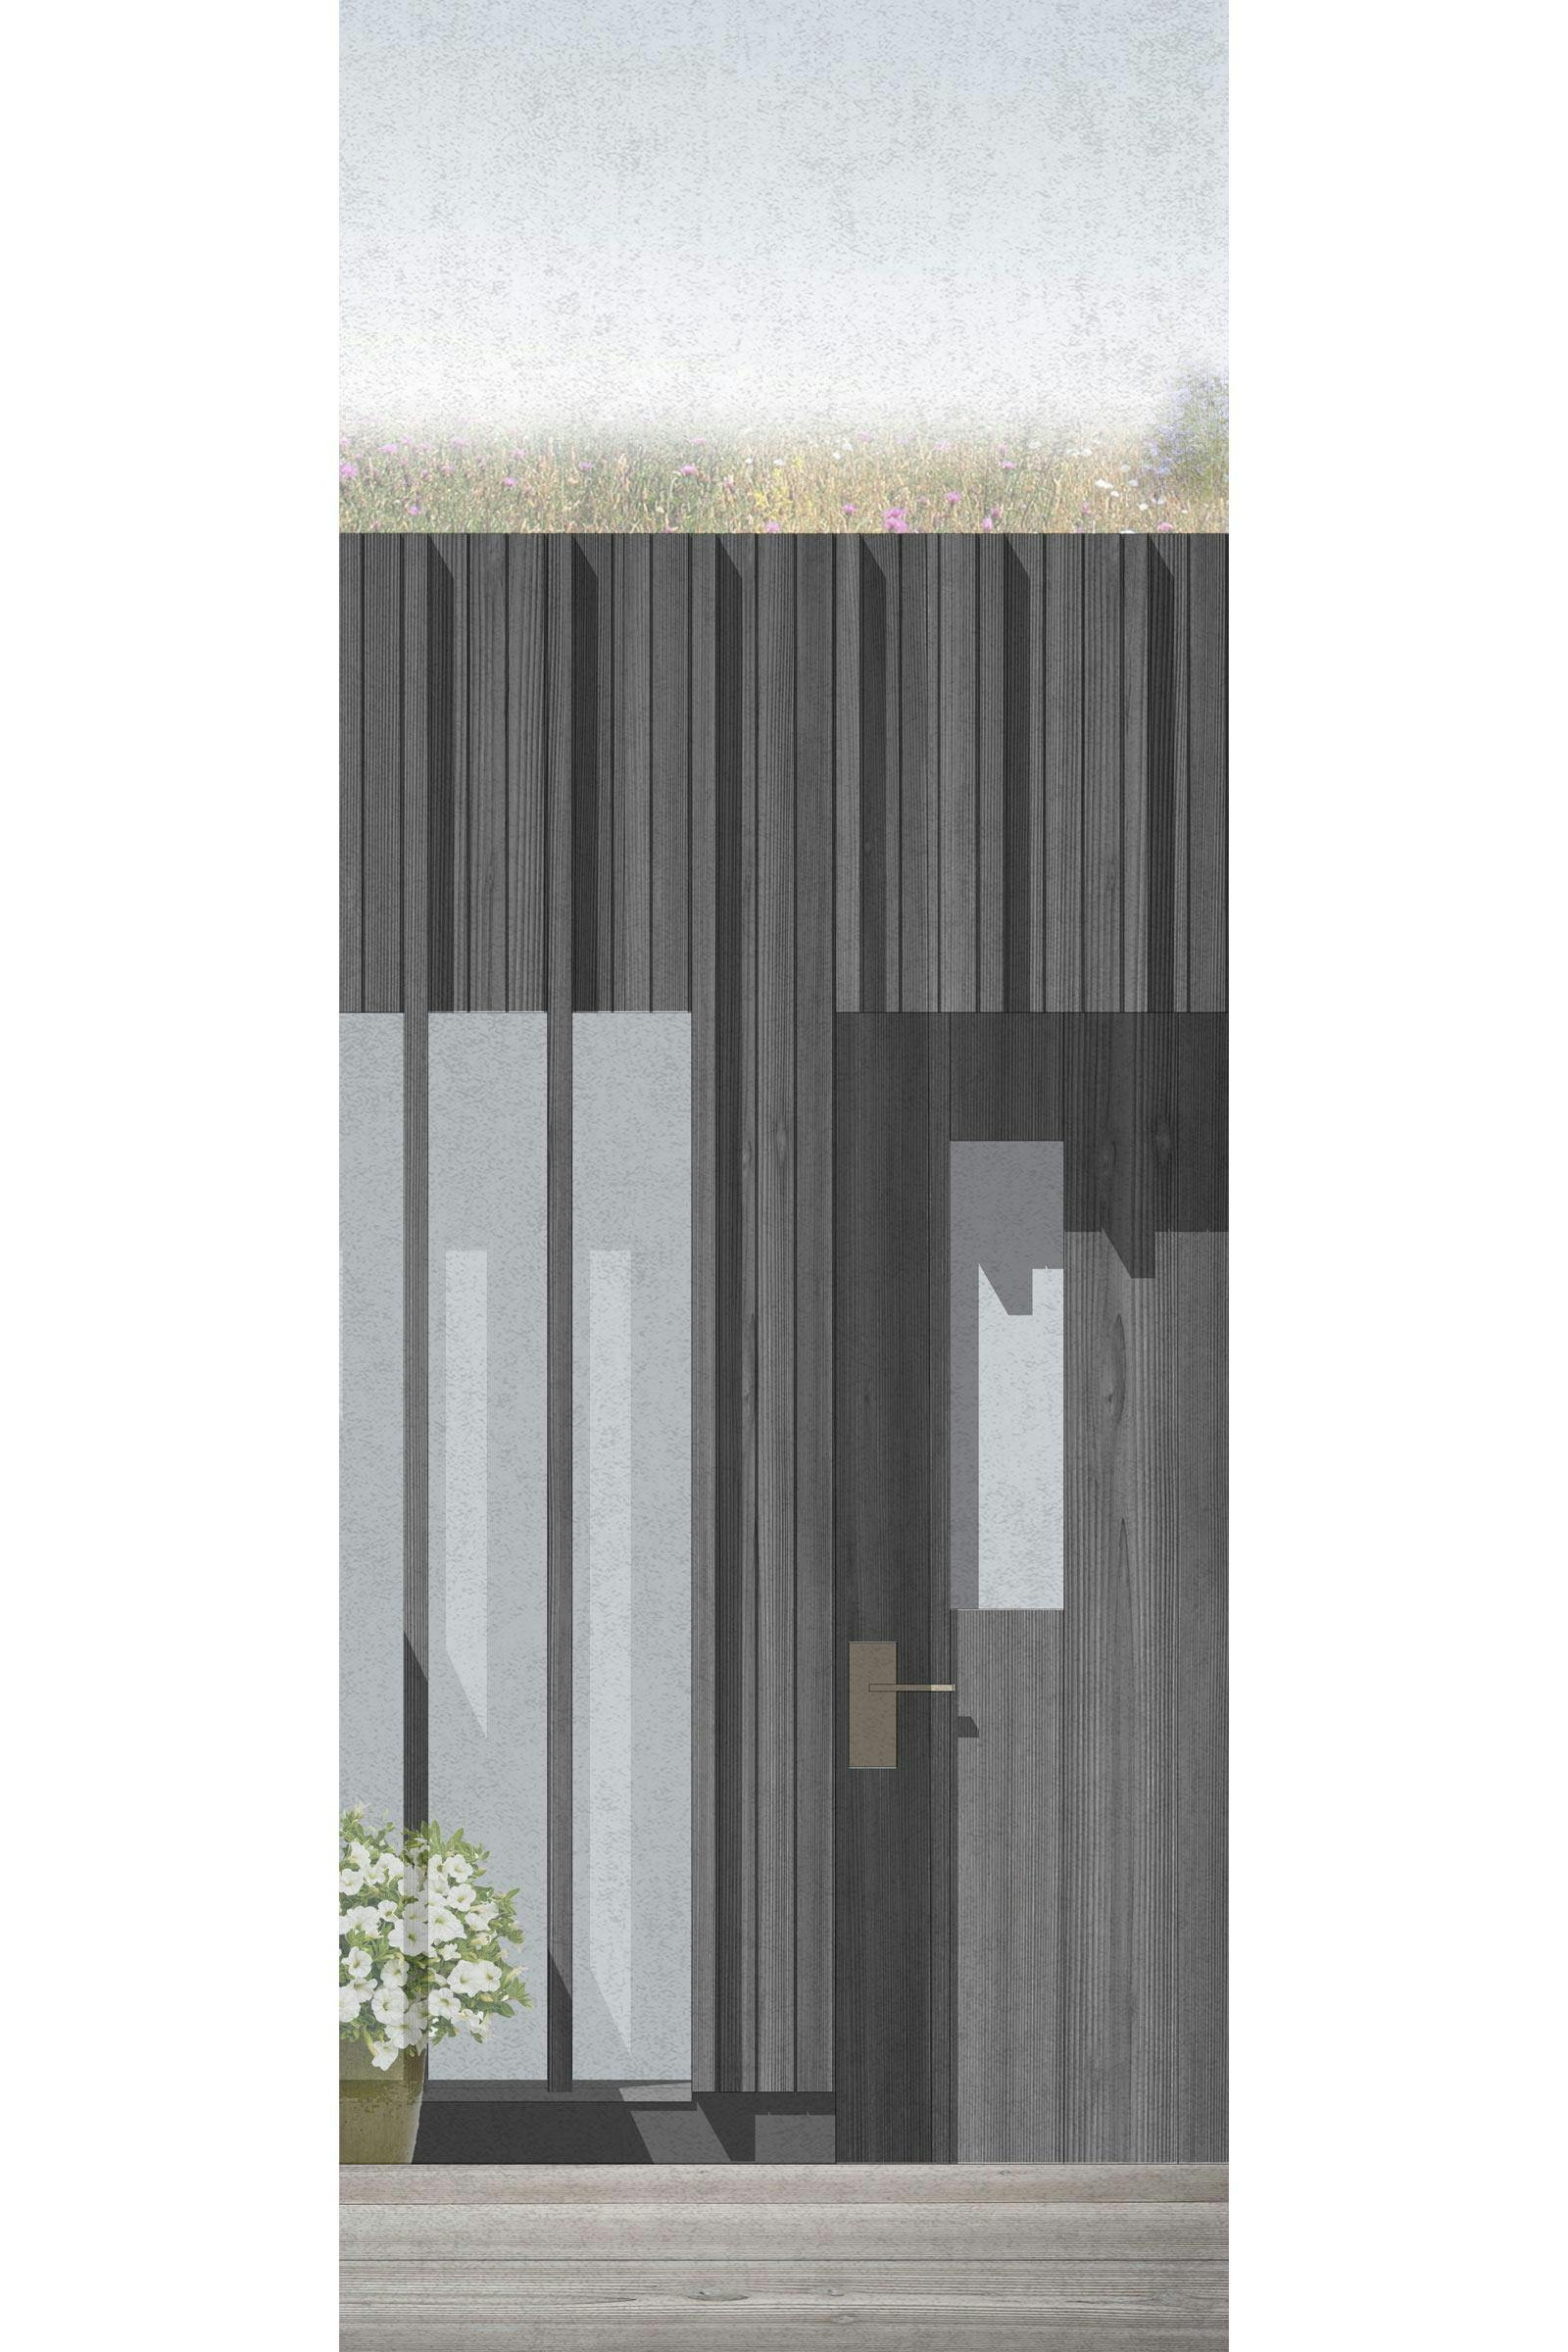 Visualisation of the elevation of Quarry House with black painted timber cladding